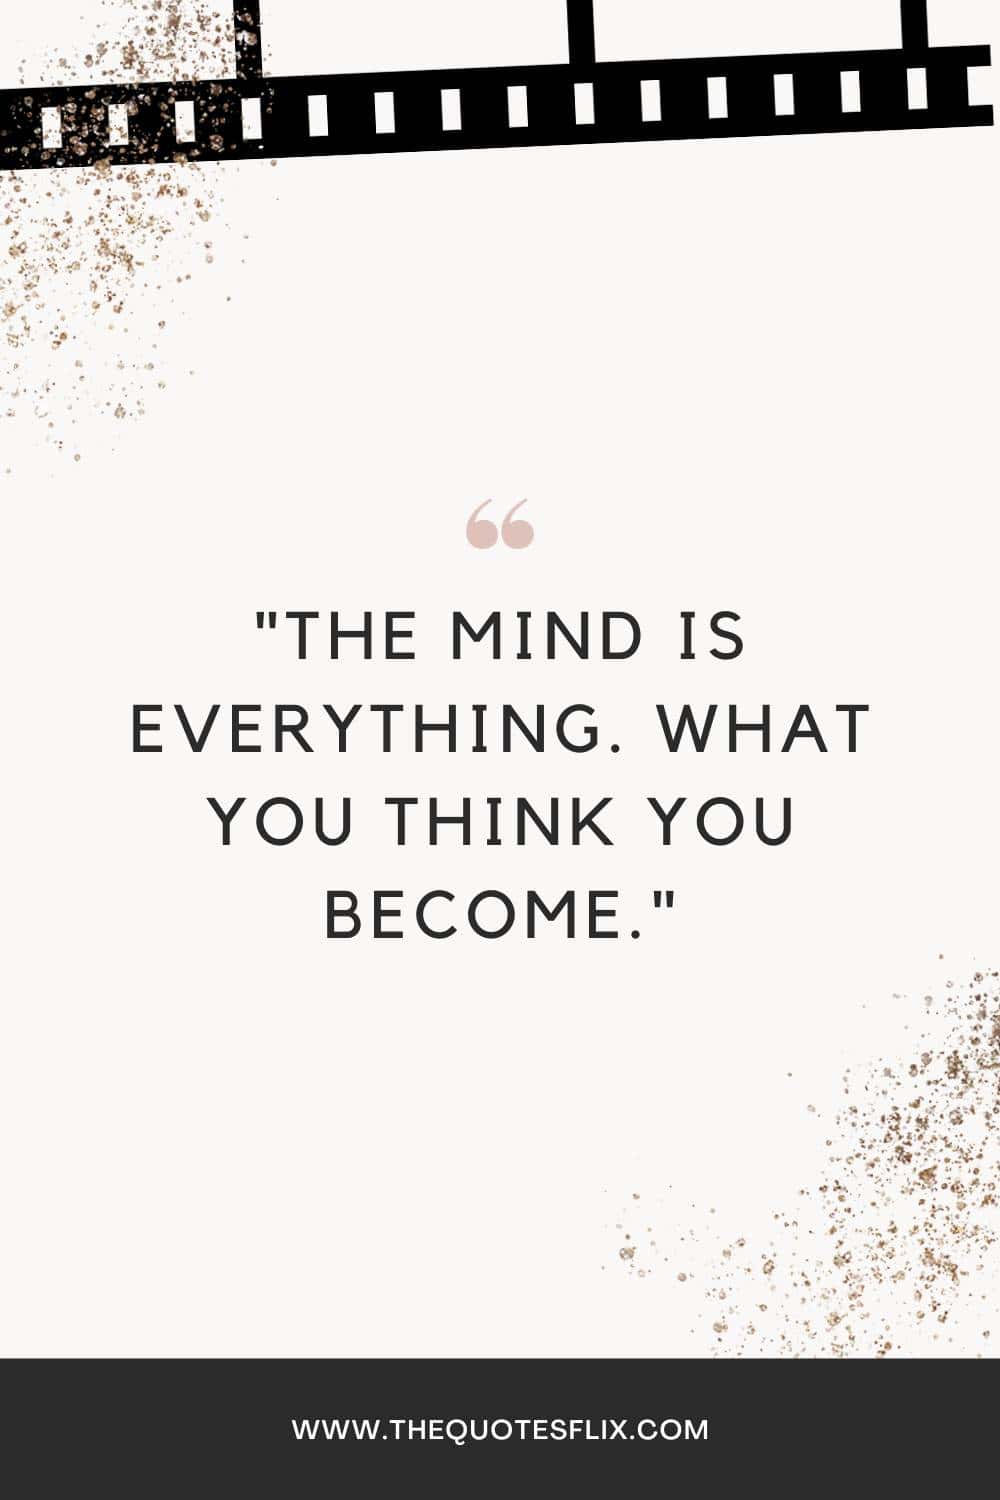 short cancer quotes - mind is everything what you become